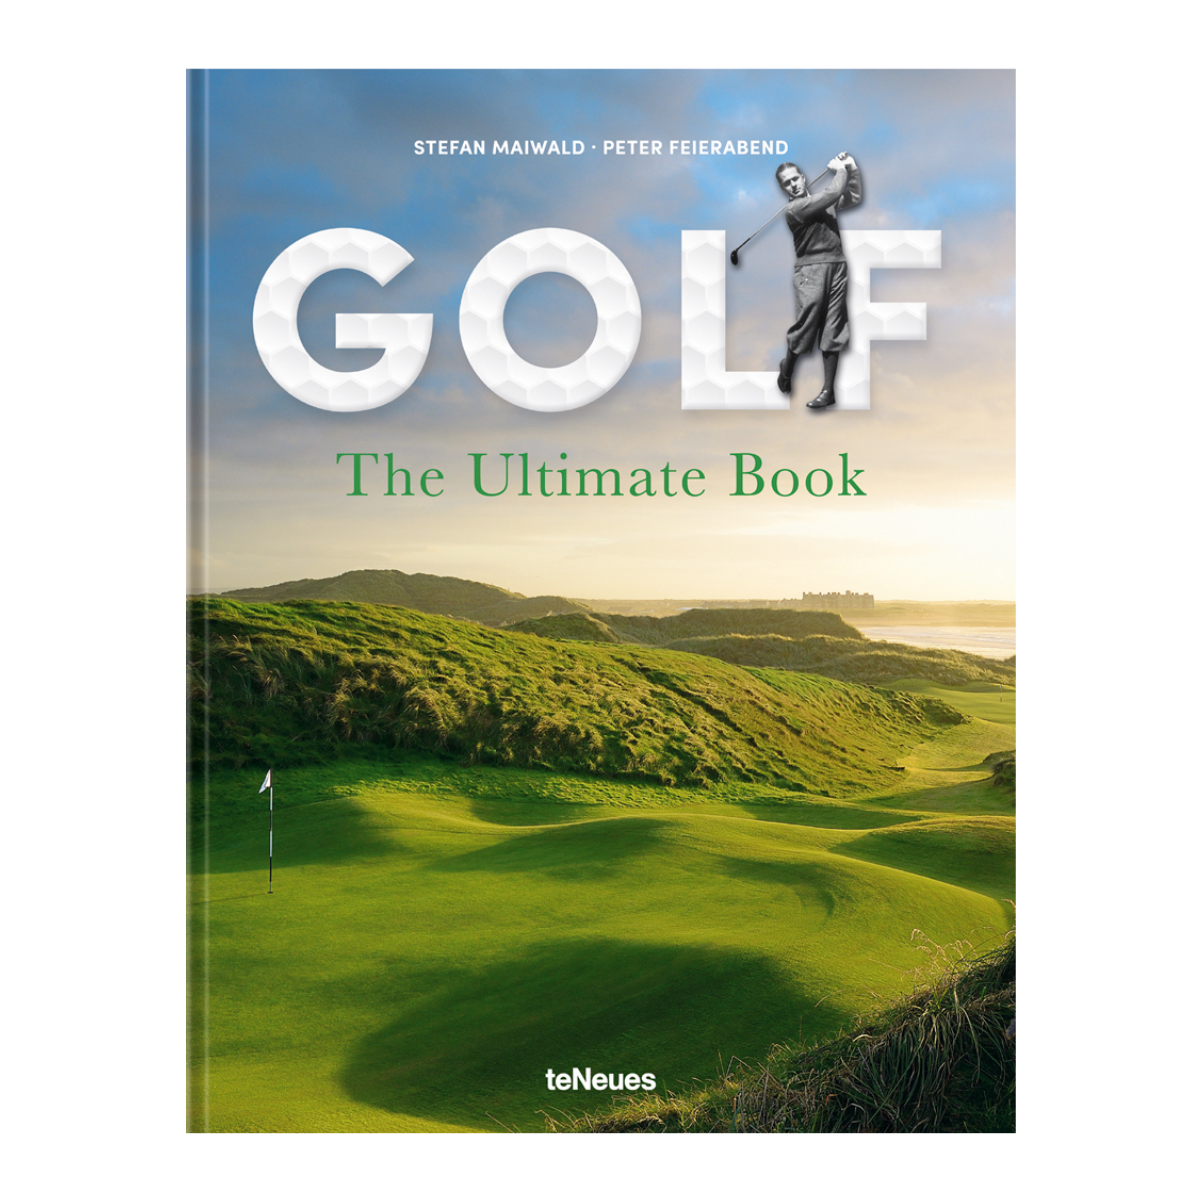 "Golf - The Ultimate Book"